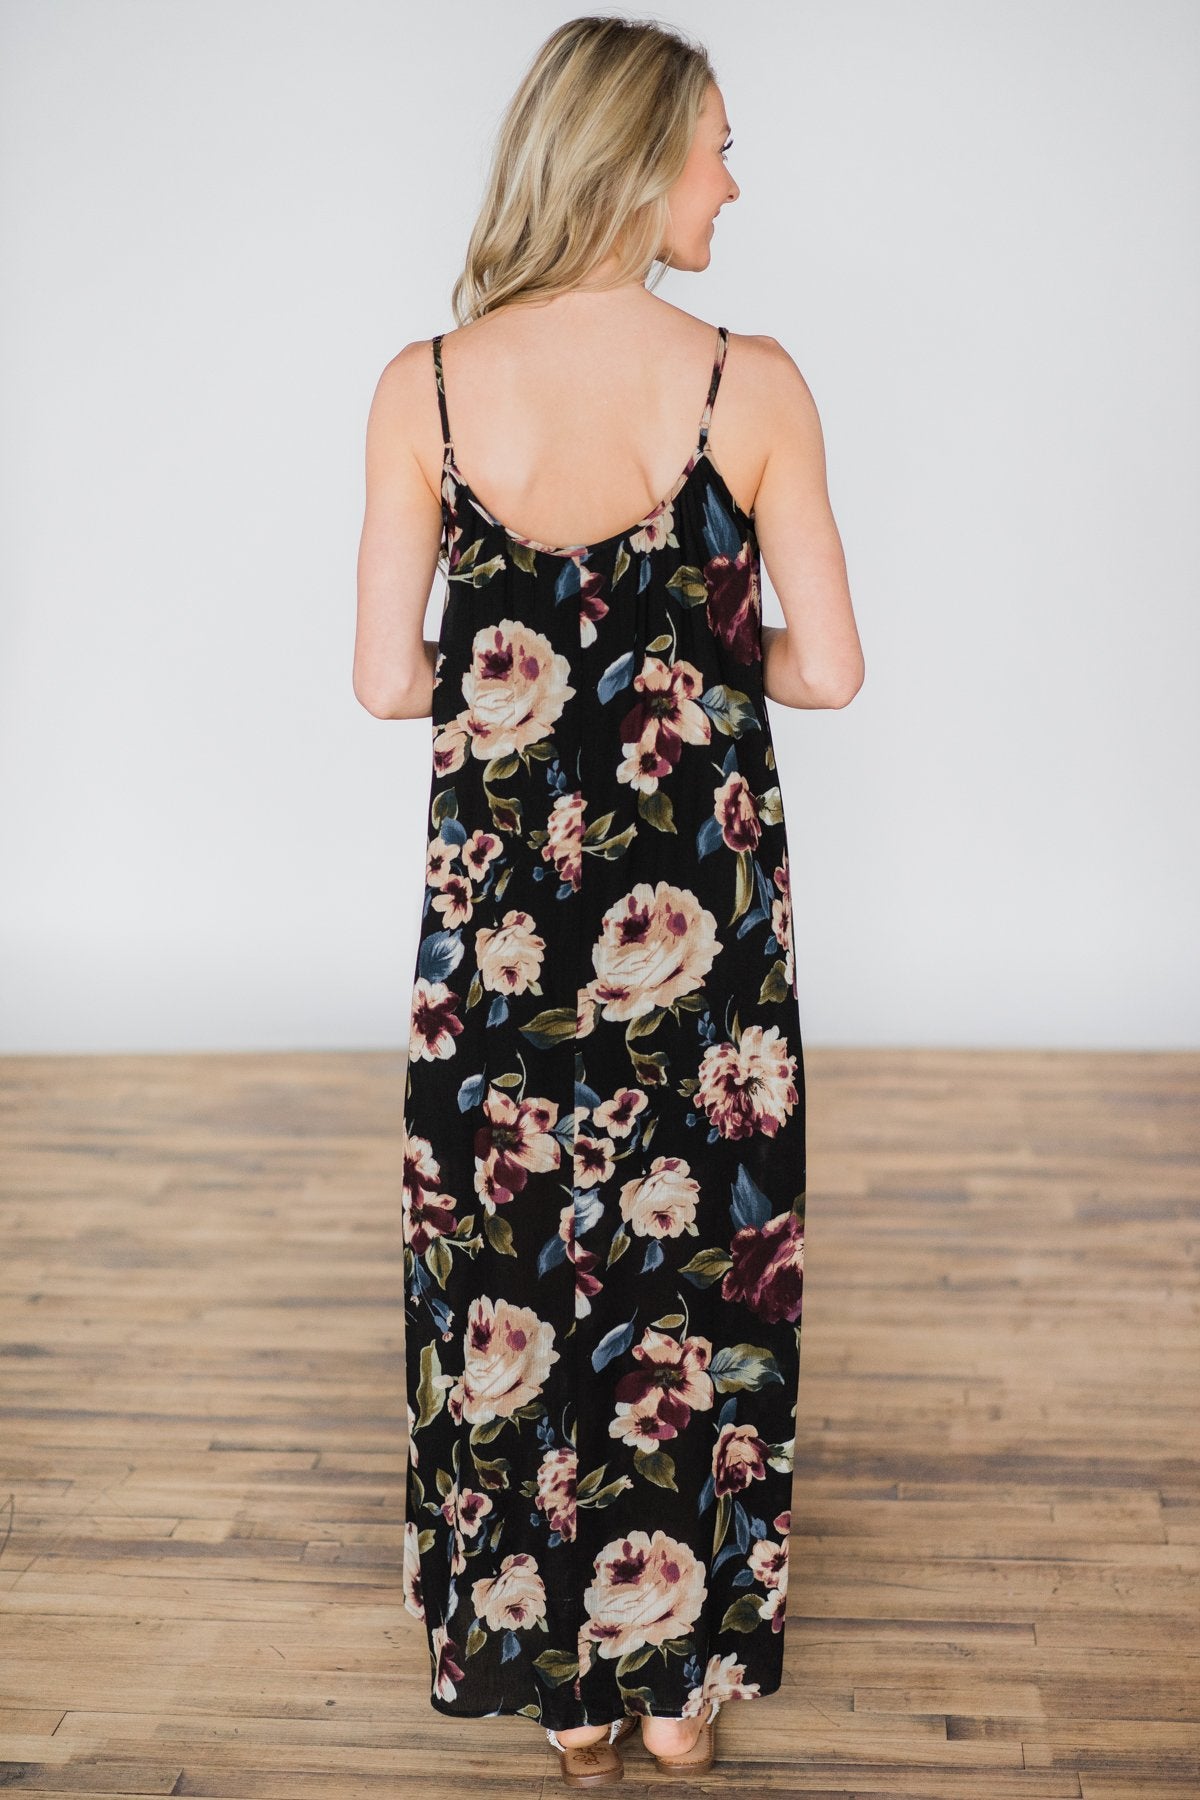 Born to Love You Floral Maxi Dress